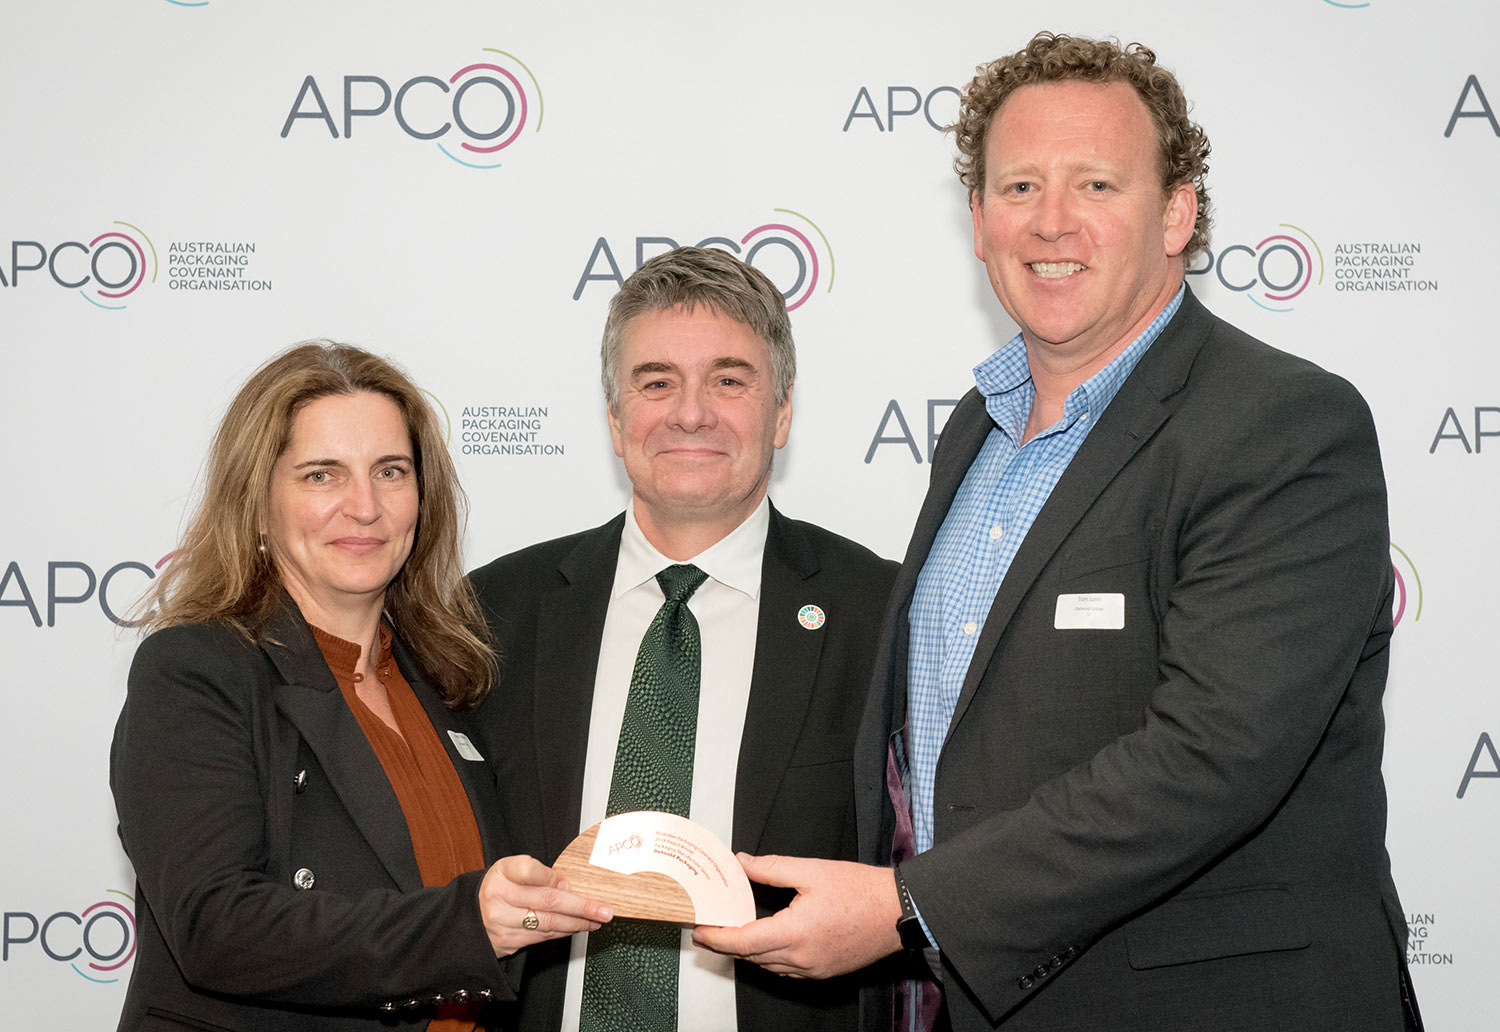 Detmold Group's Anna Falkiner, APCO Director Andrew Petersen, and Detmold Group's Tom Lunn at the APCO Awards 2019